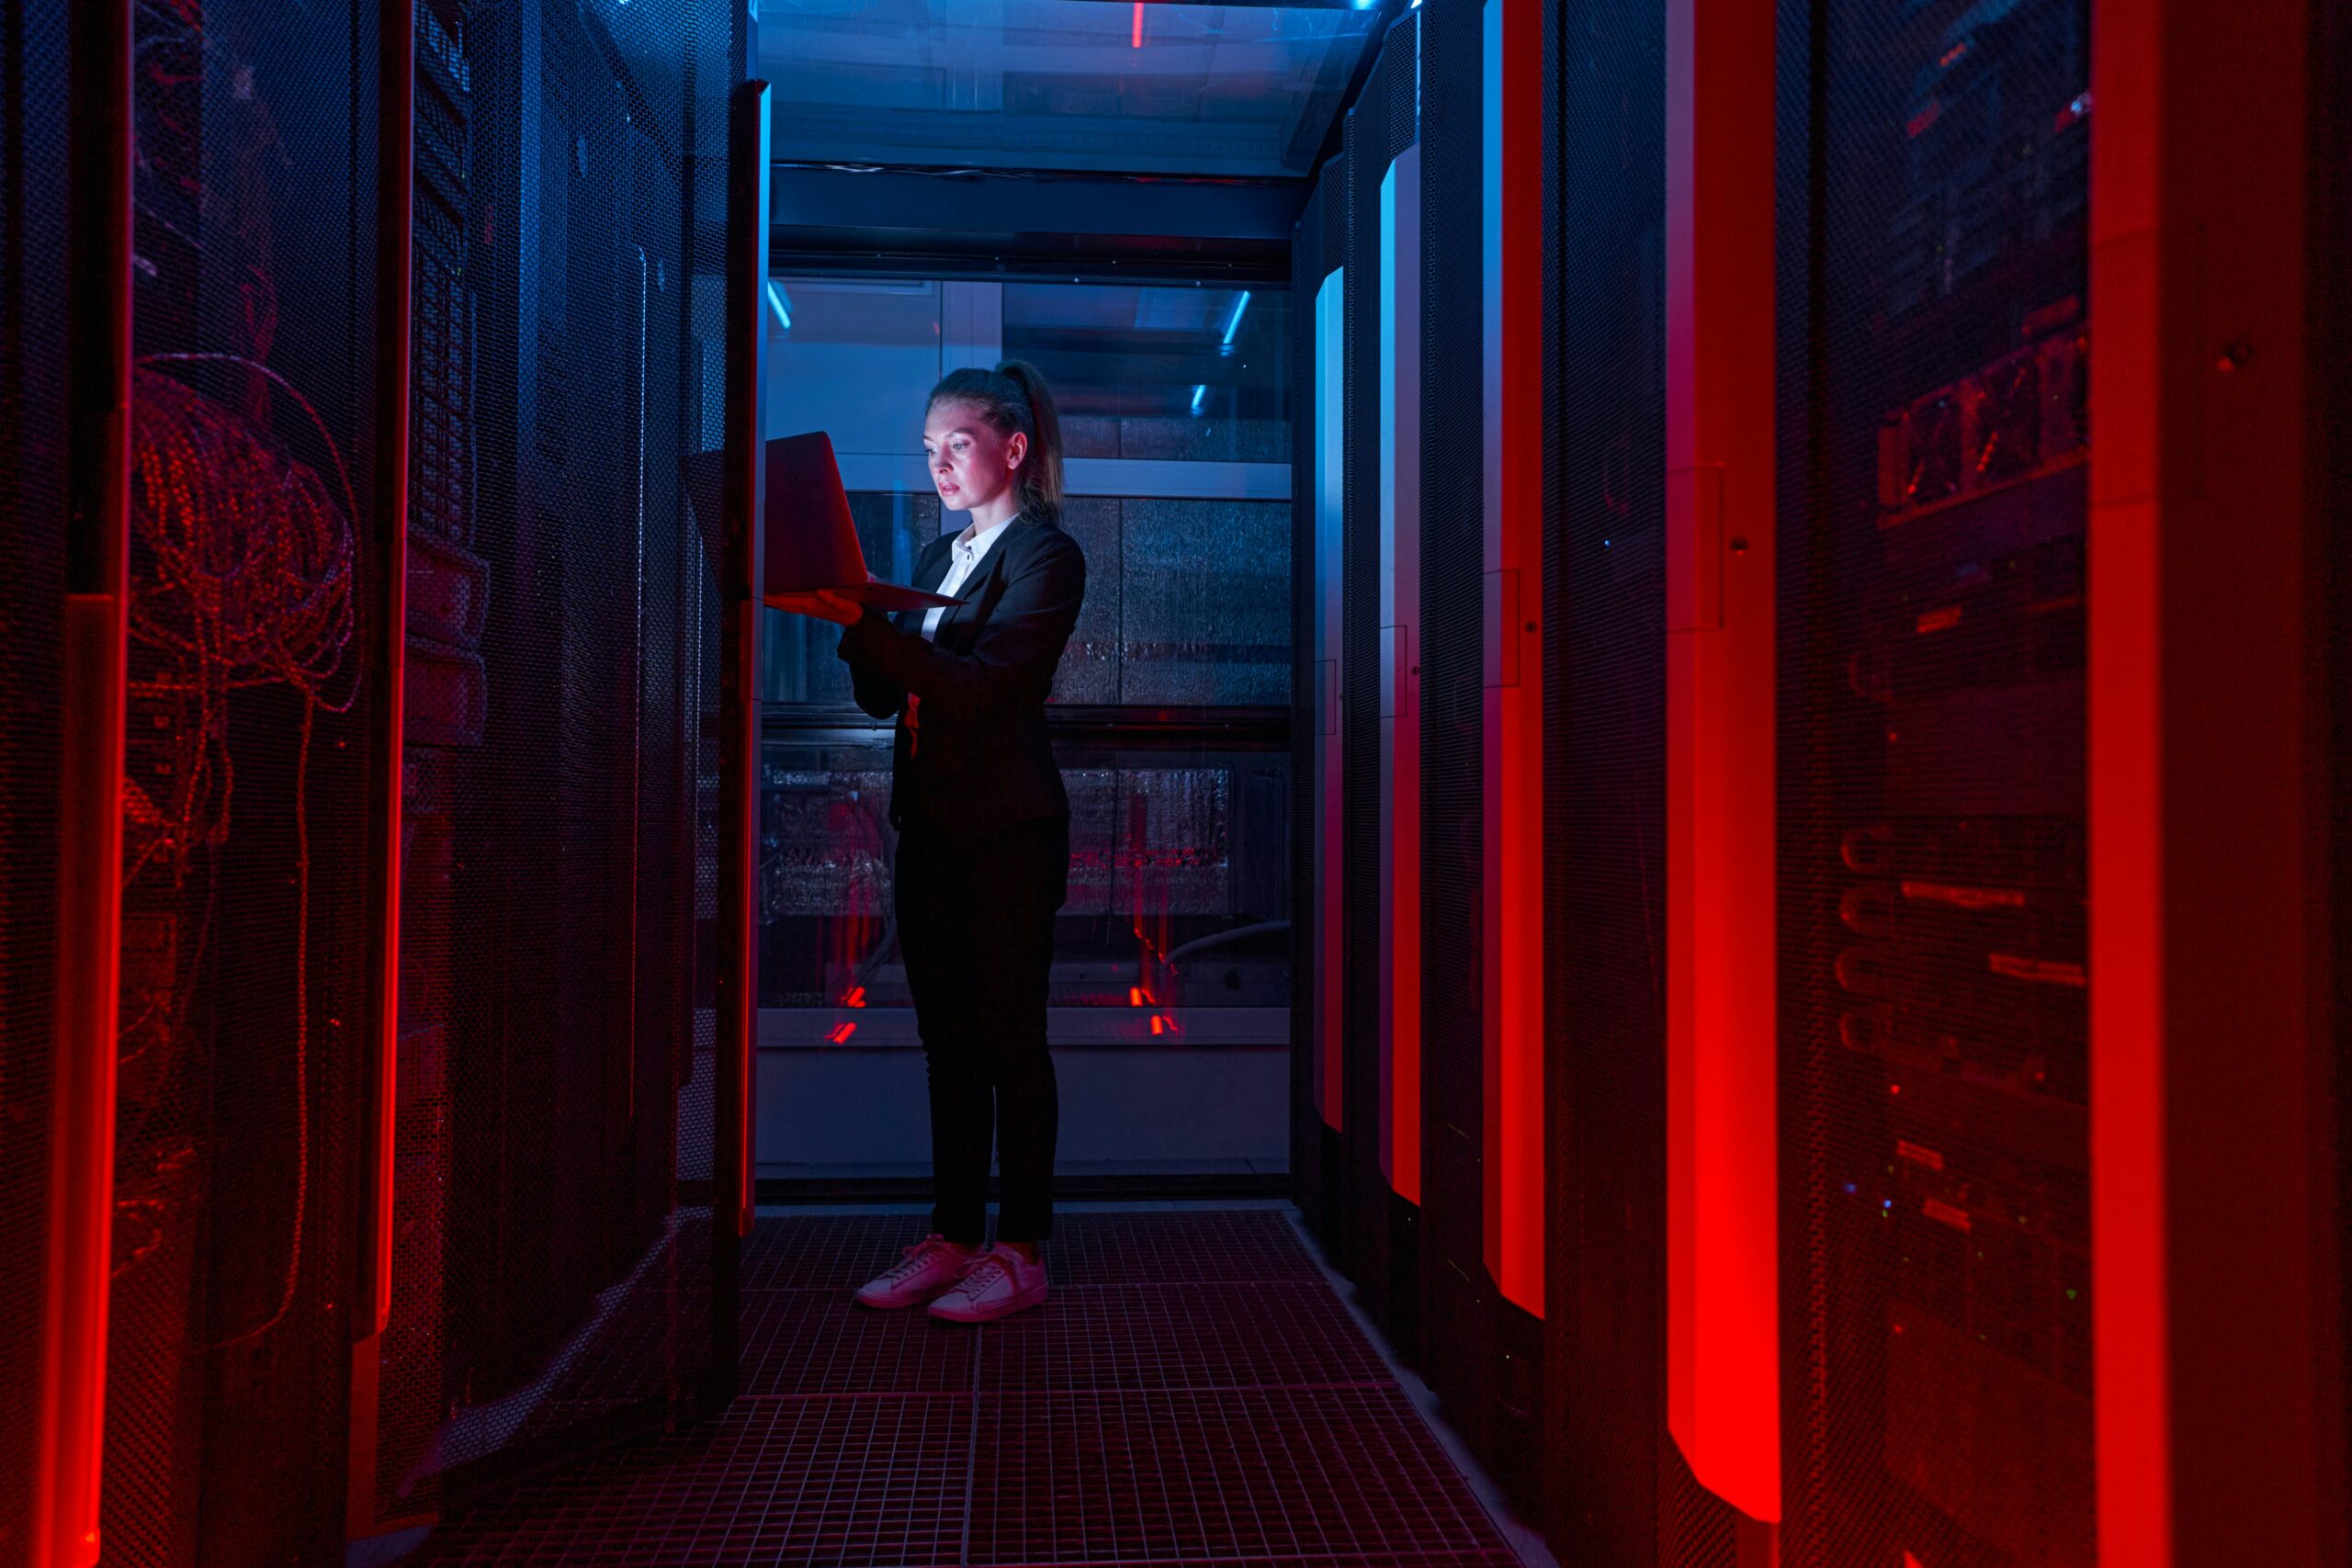 A person holding a laptop stands between server racks illuminated by red lights in an IT consulting service data center.